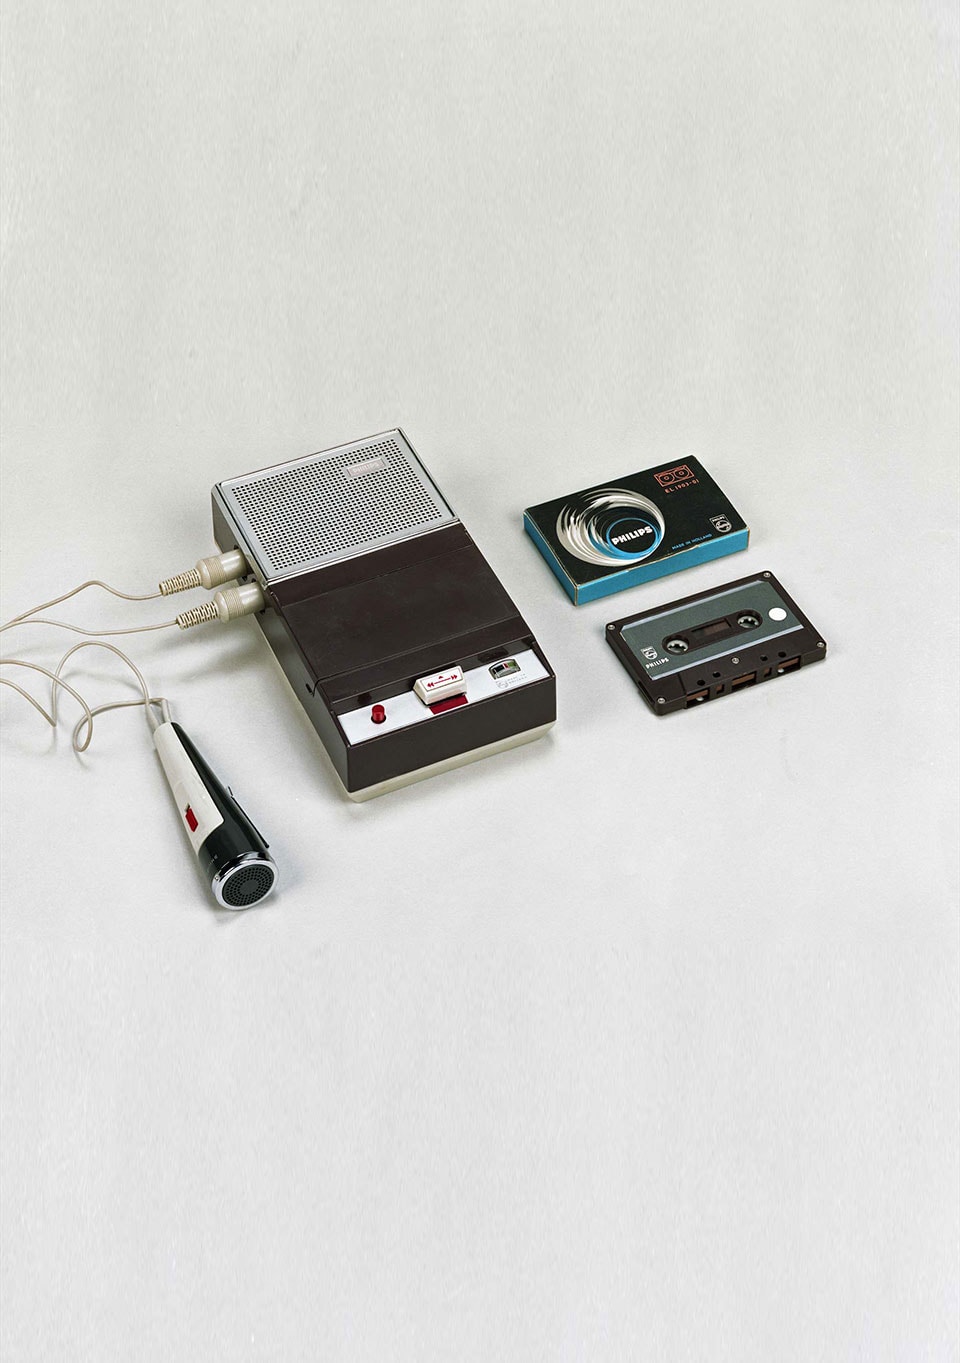 The first Philips Cassette Recorde (1963)